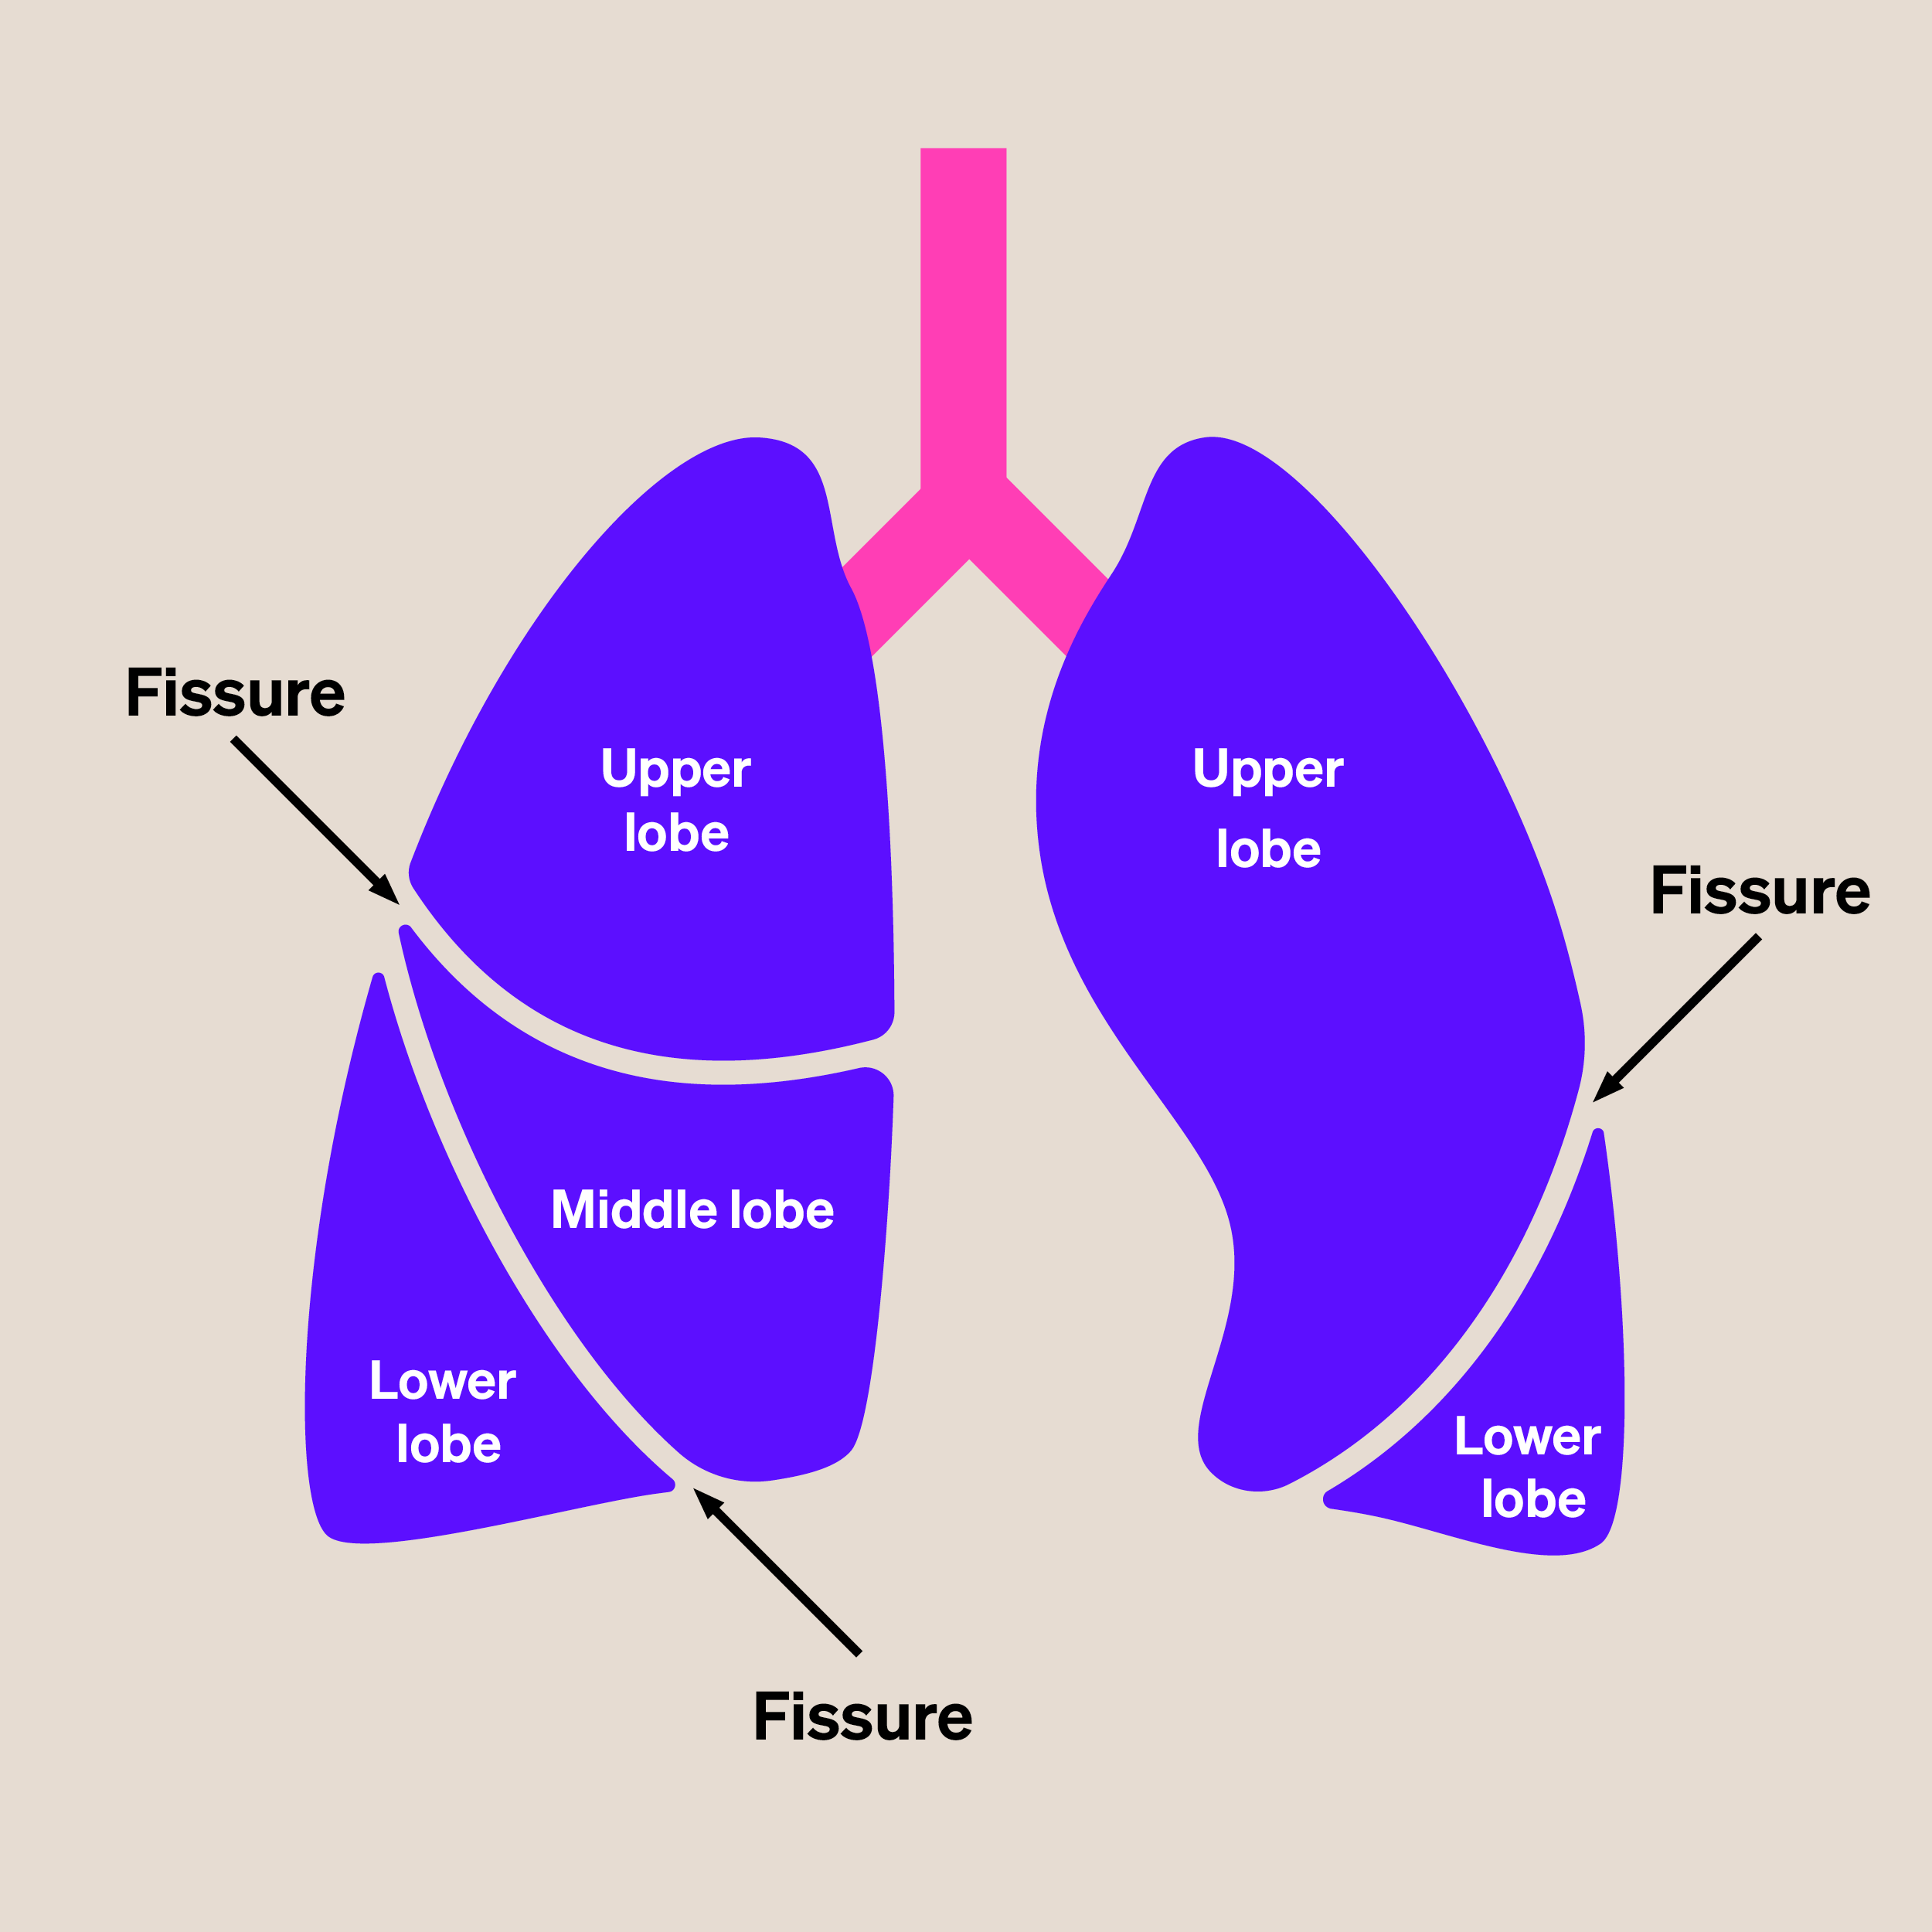 /The%20lobes%20of%20the%20lung.%20Your%20right%20lung%20is%20made%20up%20of%20three%20lobes.%20Your%20left%20lung%20has%20two%20lobes.%20The%20lines%20that%20separate%20the%20lobes%20of%20the%20lungs%20are%20called%20fissures.